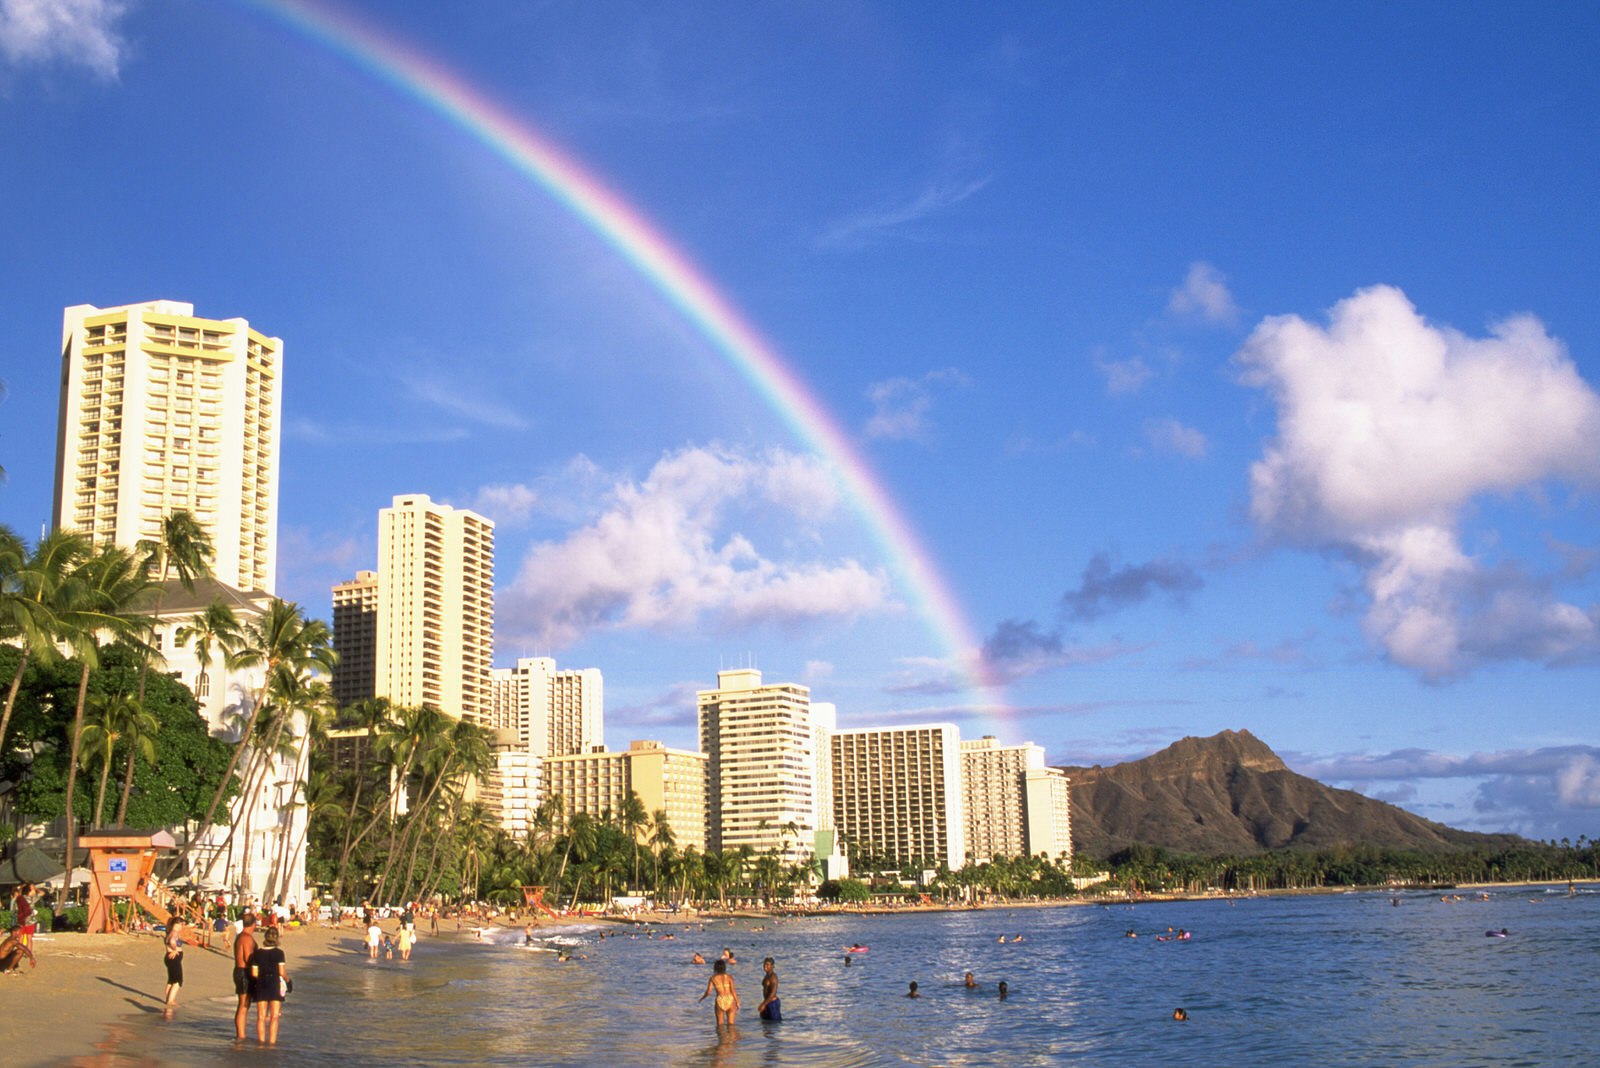 People wade through the waters off Waikiki beach, as a long clear rainbow arches its way to diamond head in the distance © Elfi Kluck / Getty Images